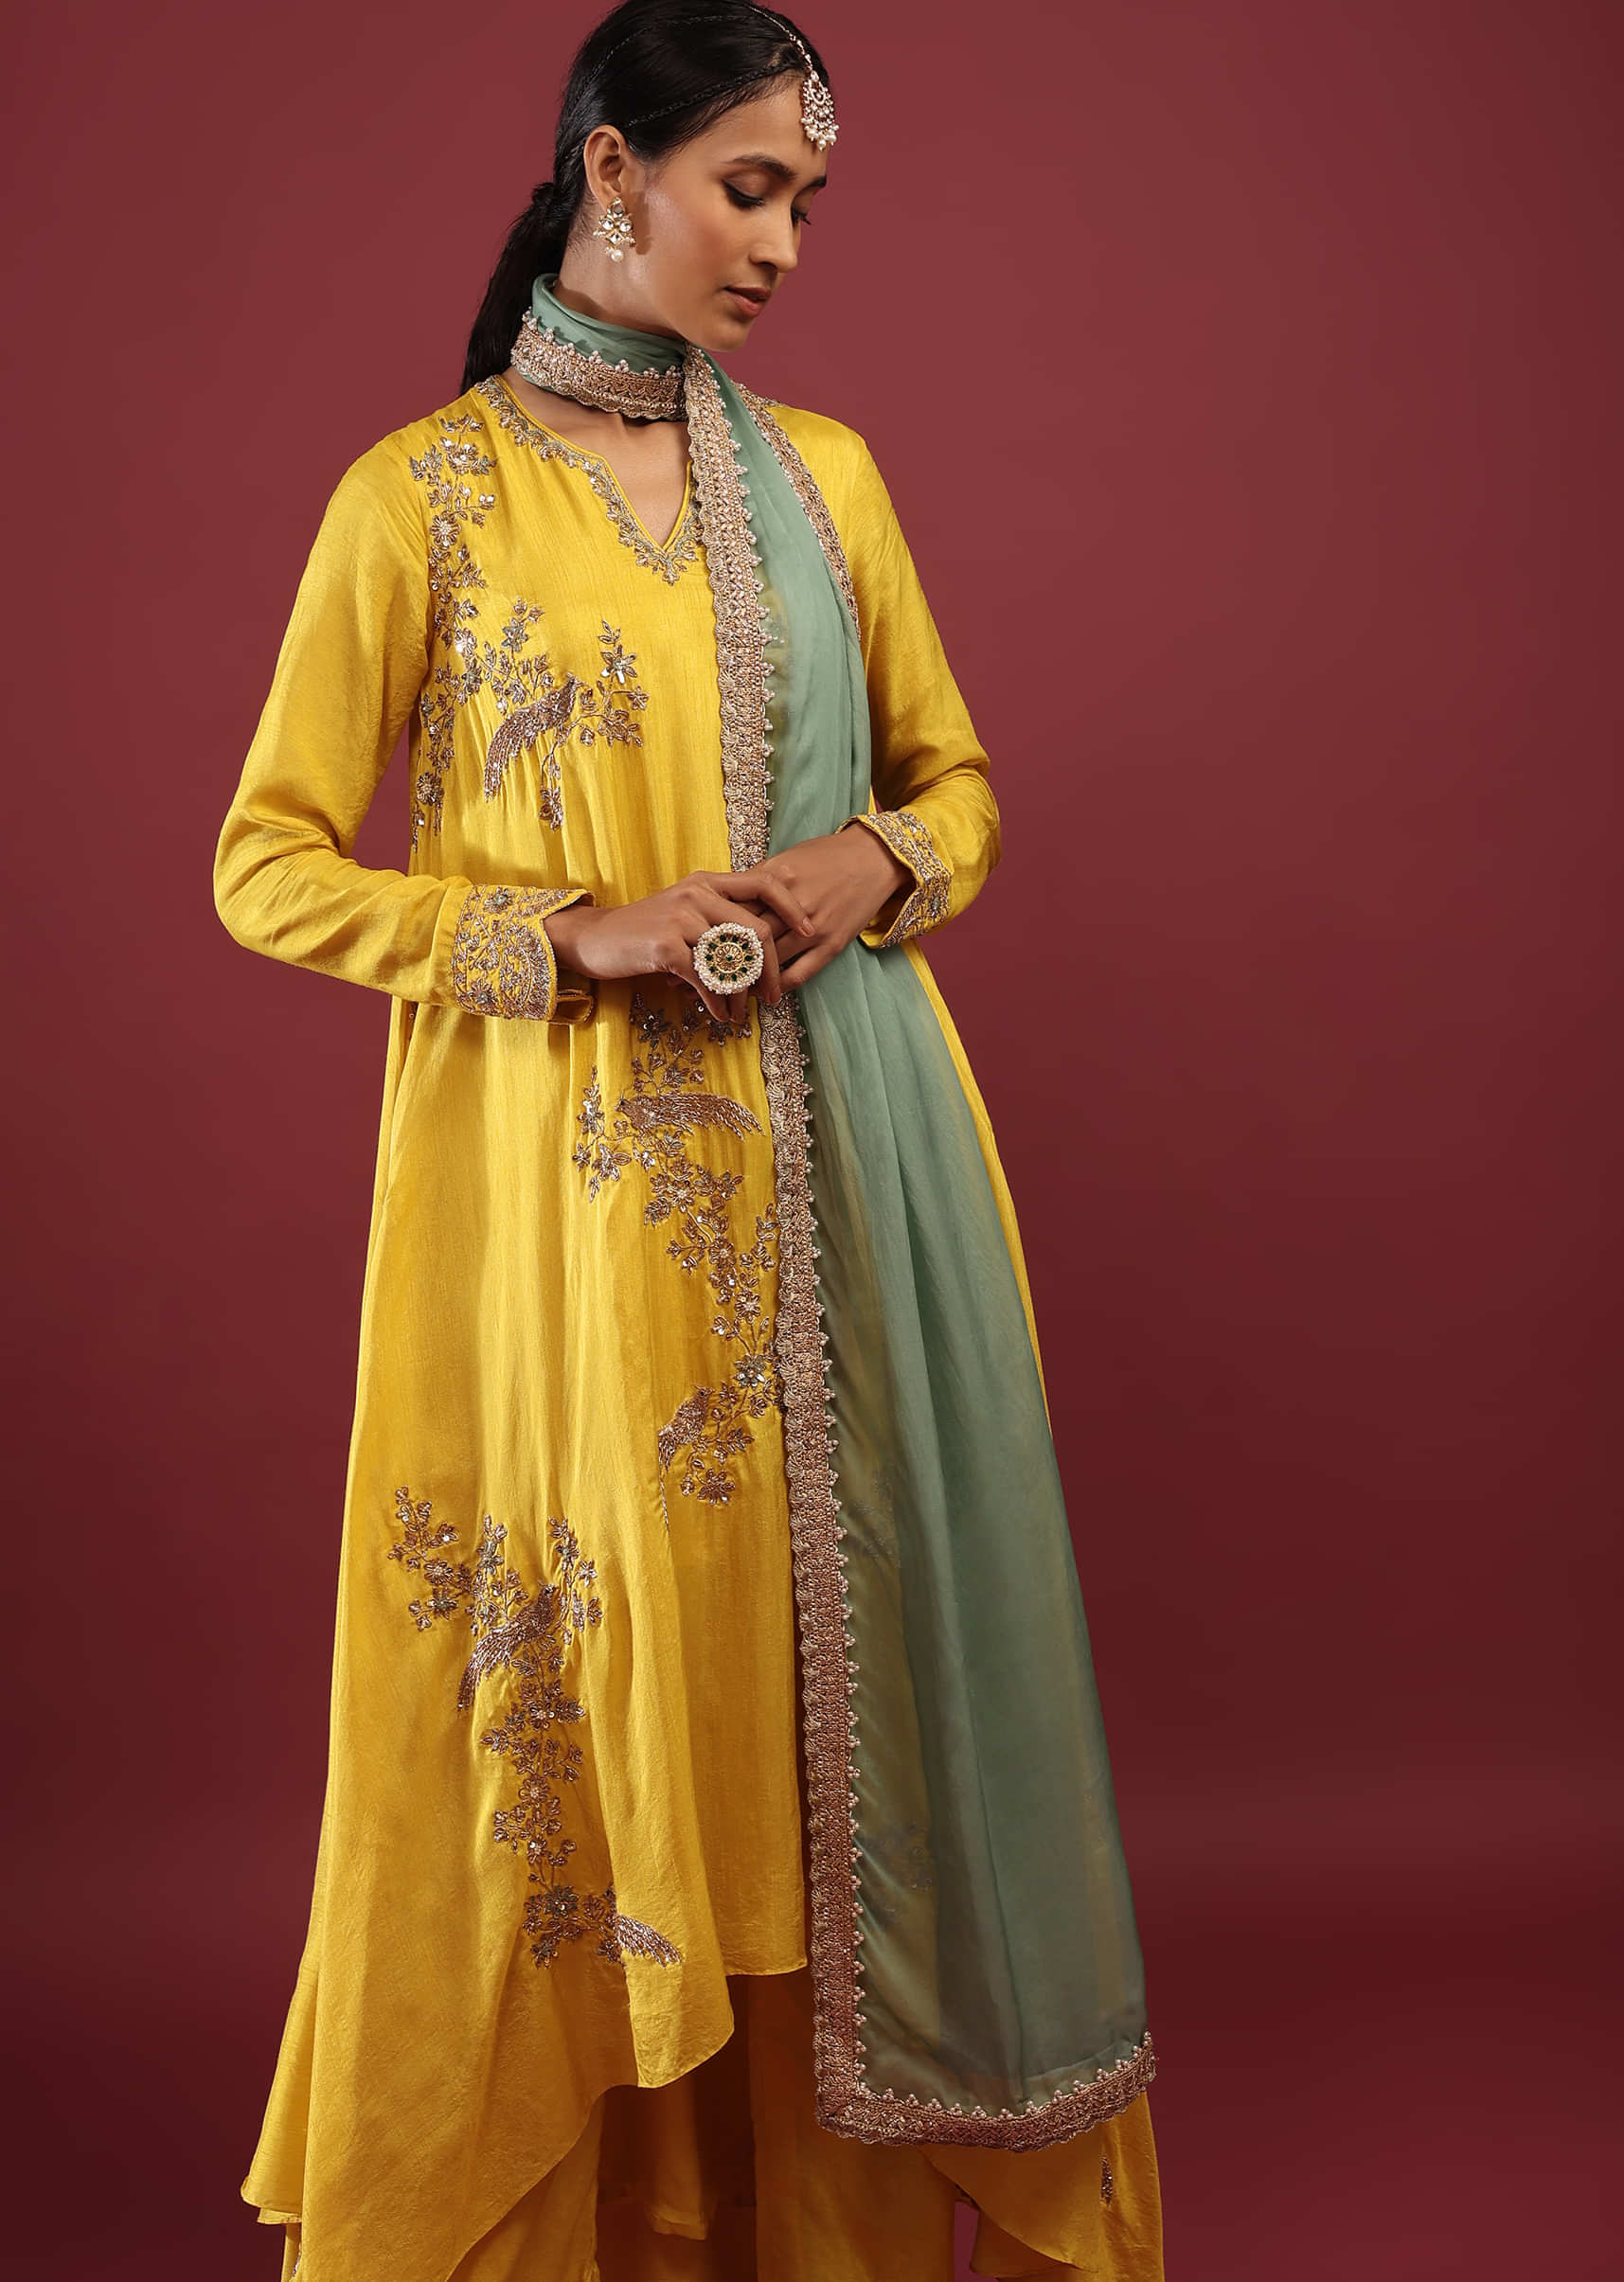 Cyber Yellow A Line Suit With Zardosi Embroidered Bird Motifs And Neptune Green Dupatta